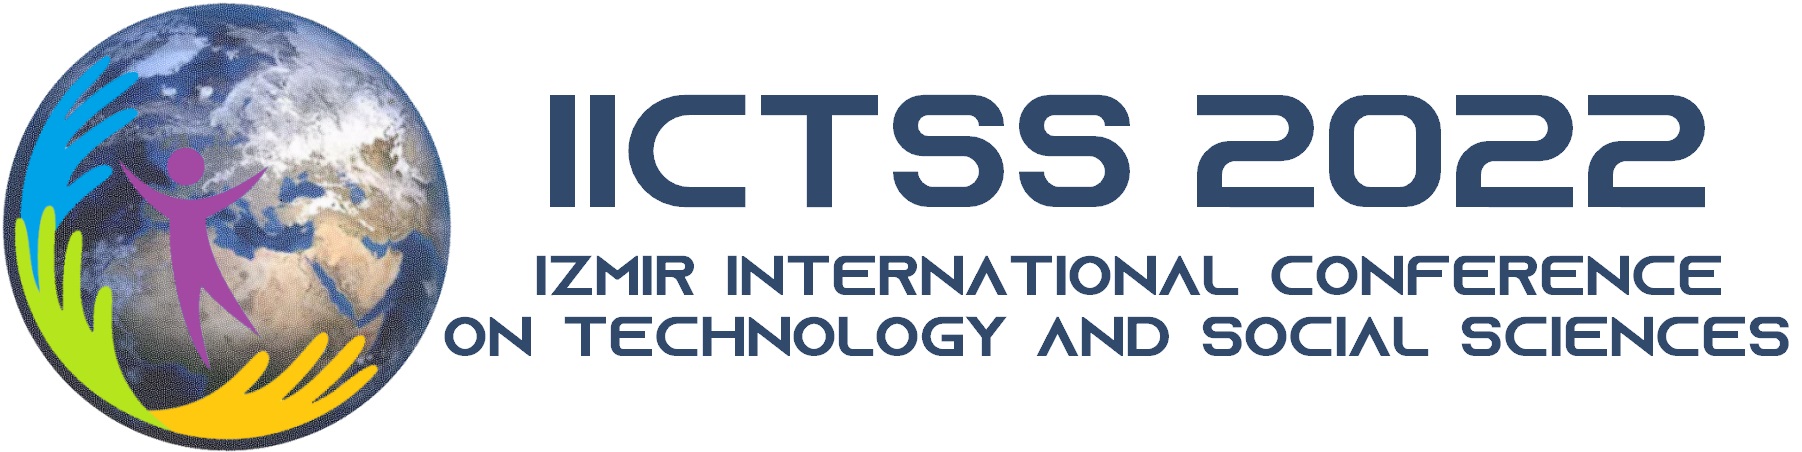 İzmir International Conference on Technology and Social Sciences IICTSS 2022